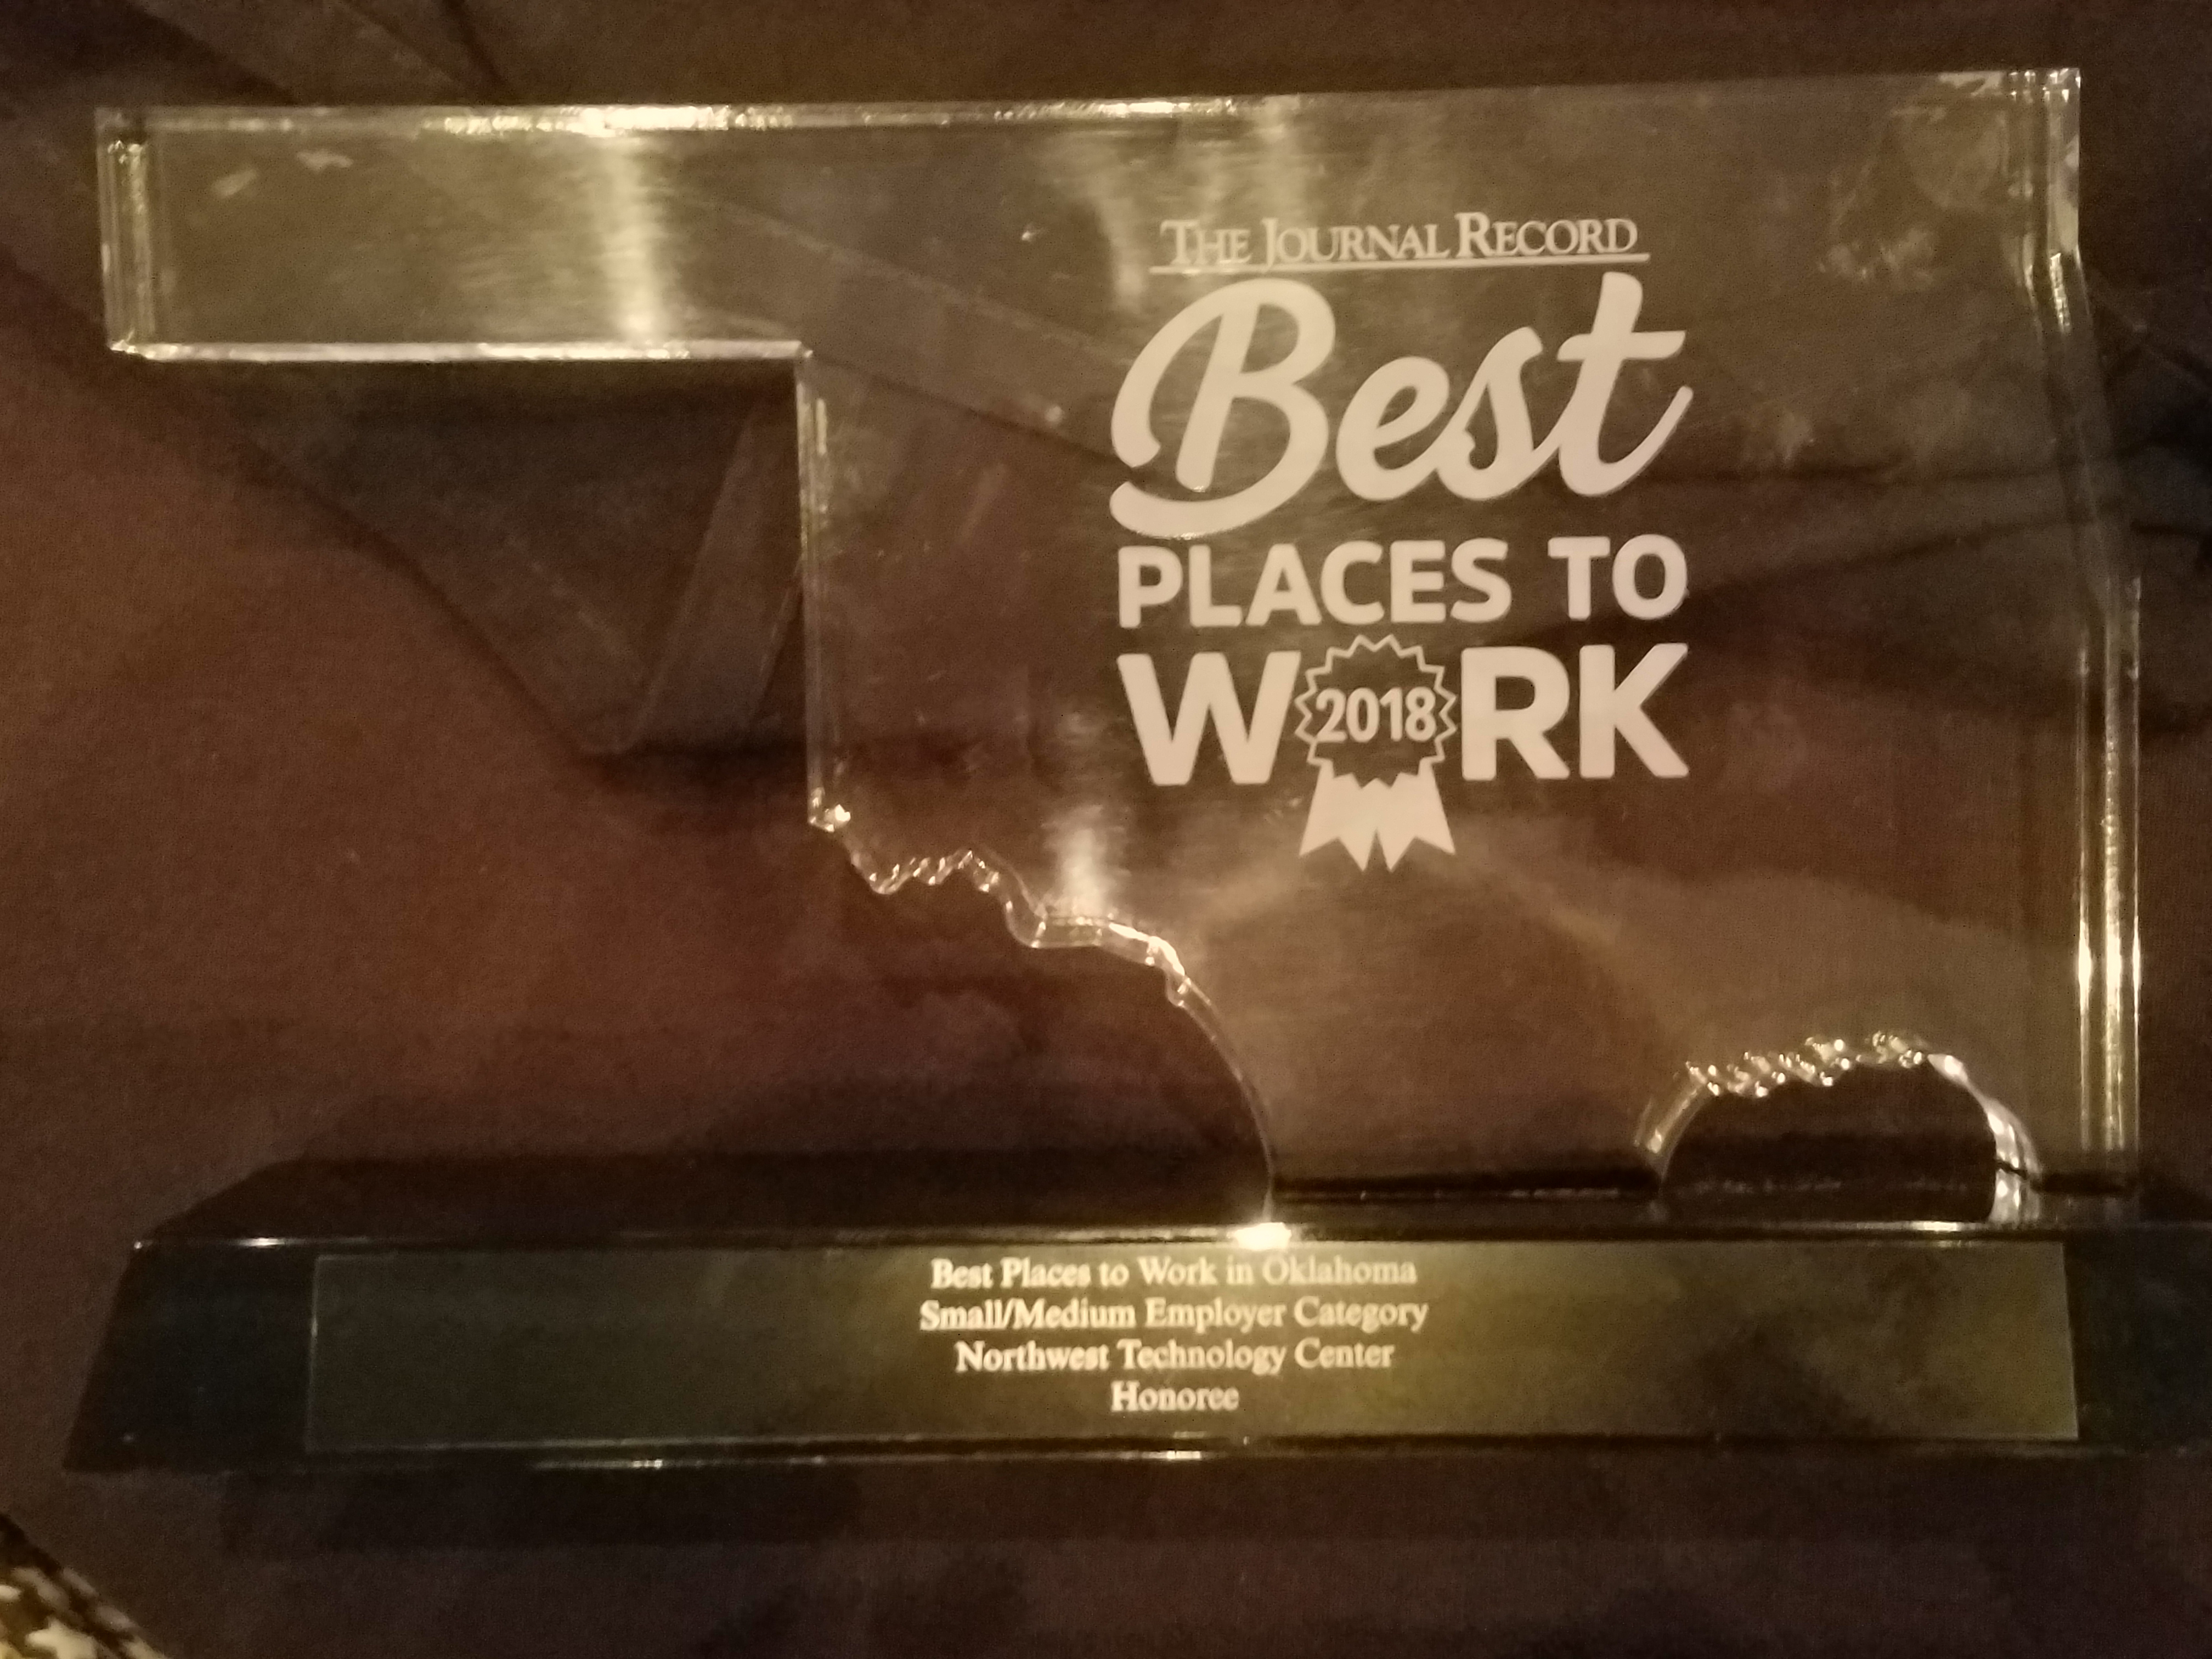 NWTC Recognized With Best Places To Work Award Northwest Technology Center